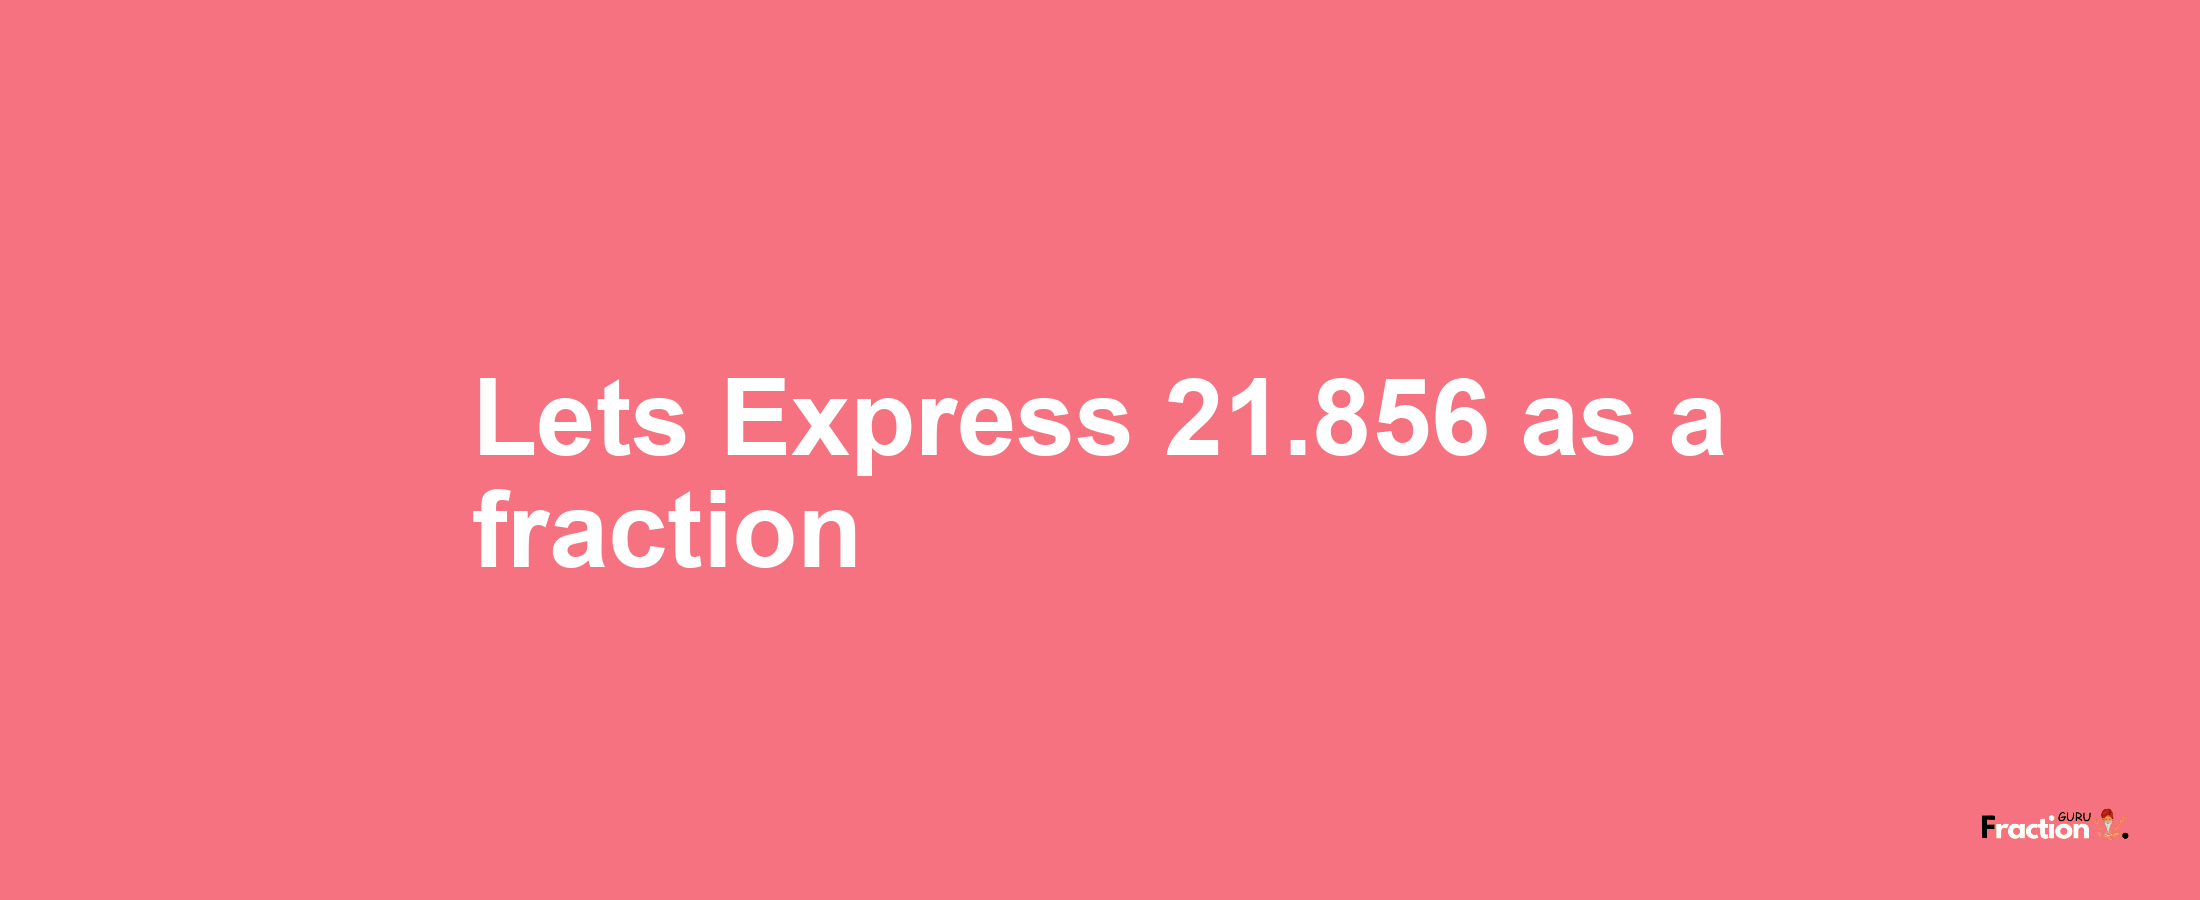 Lets Express 21.856 as afraction